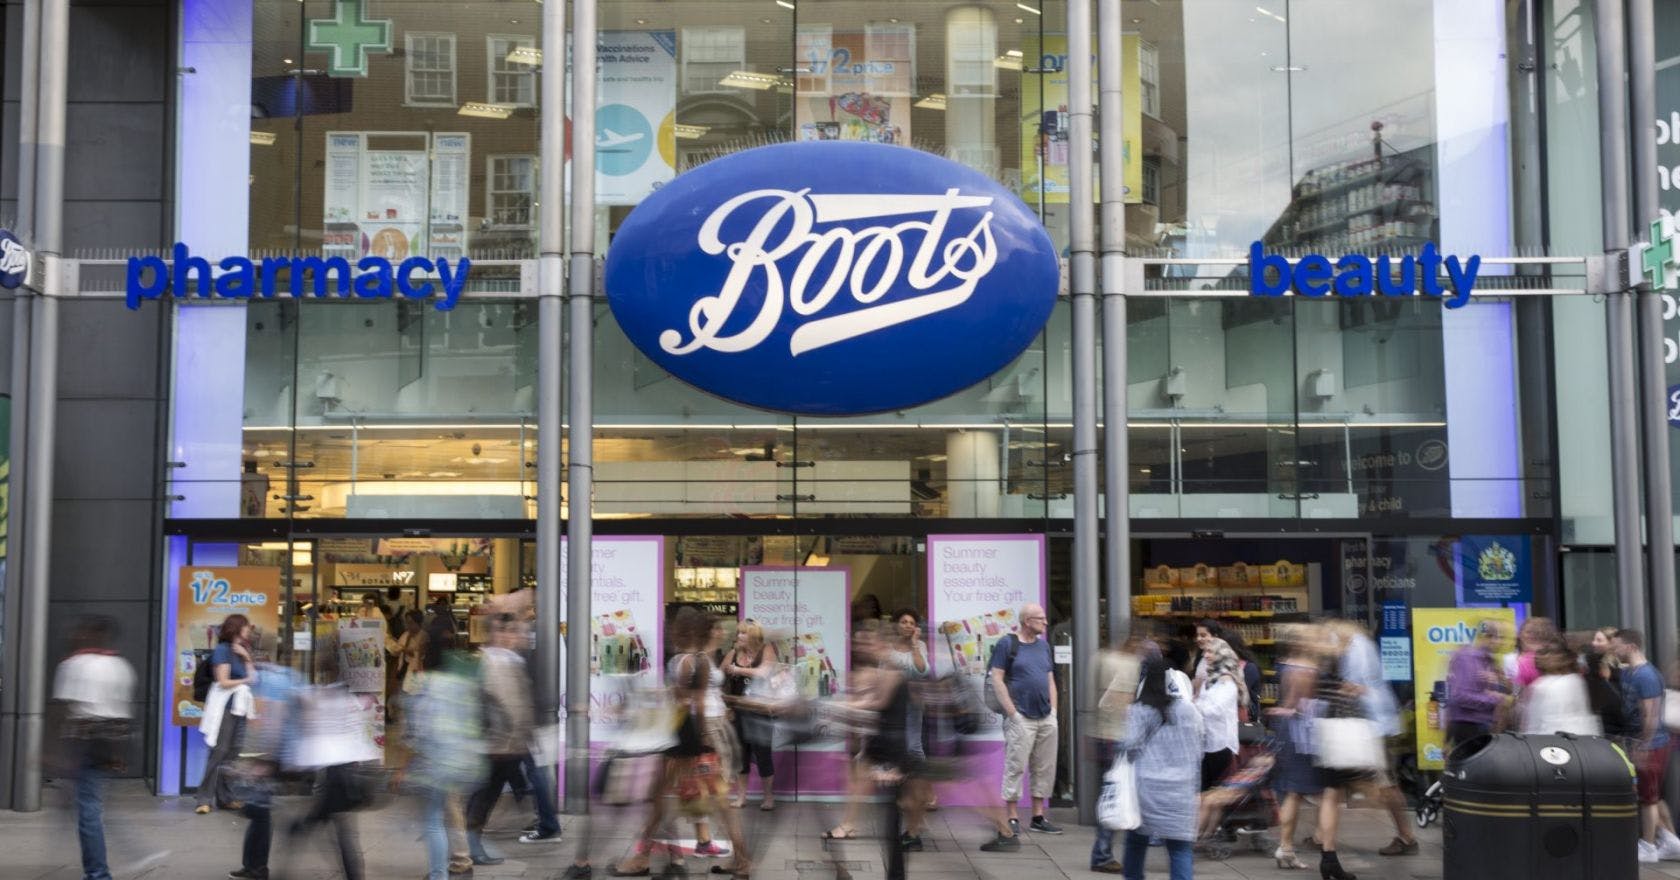 Boots launches beauty recycling scheme